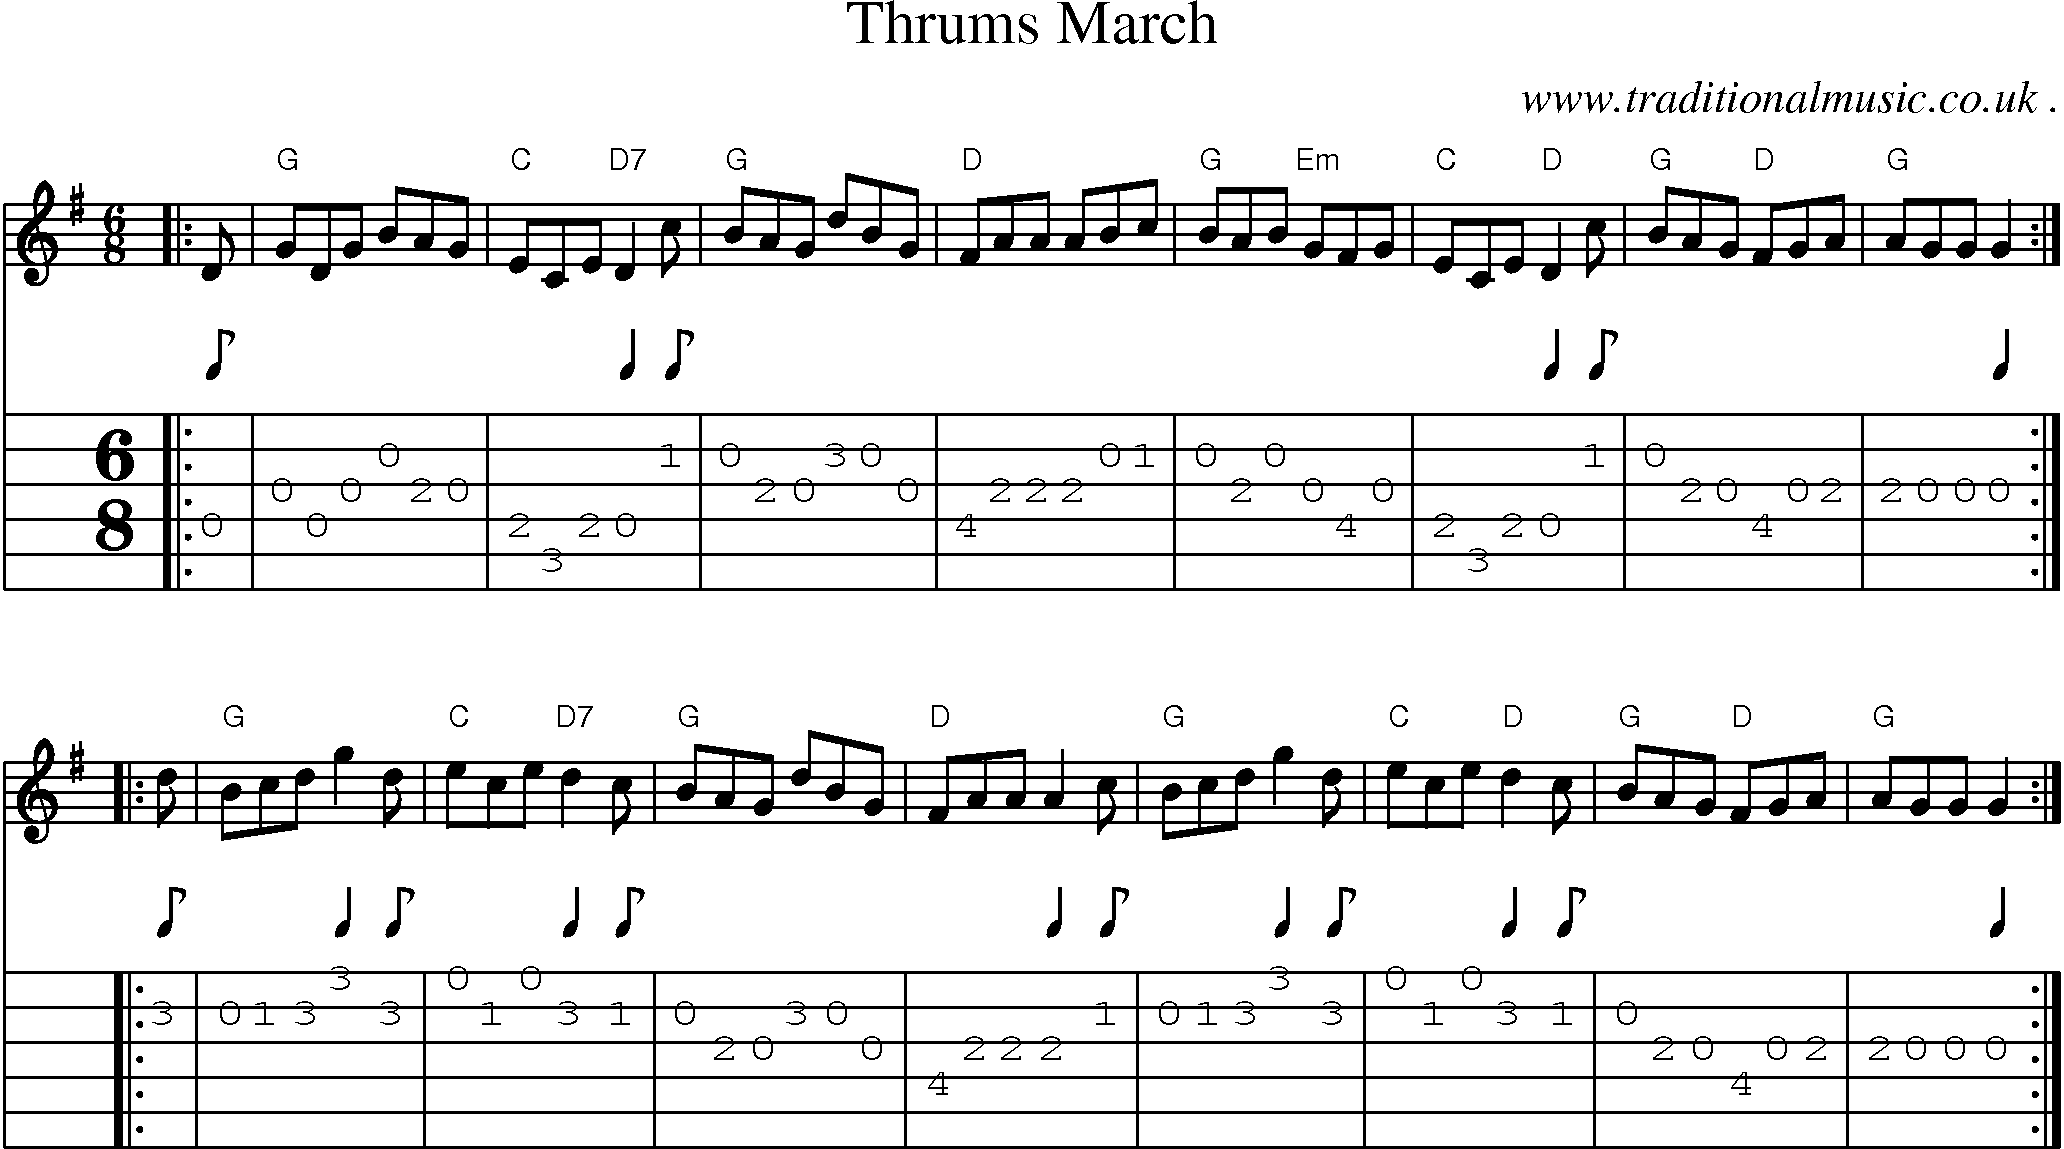 Sheet-music  score, Chords and Guitar Tabs for Thrums March